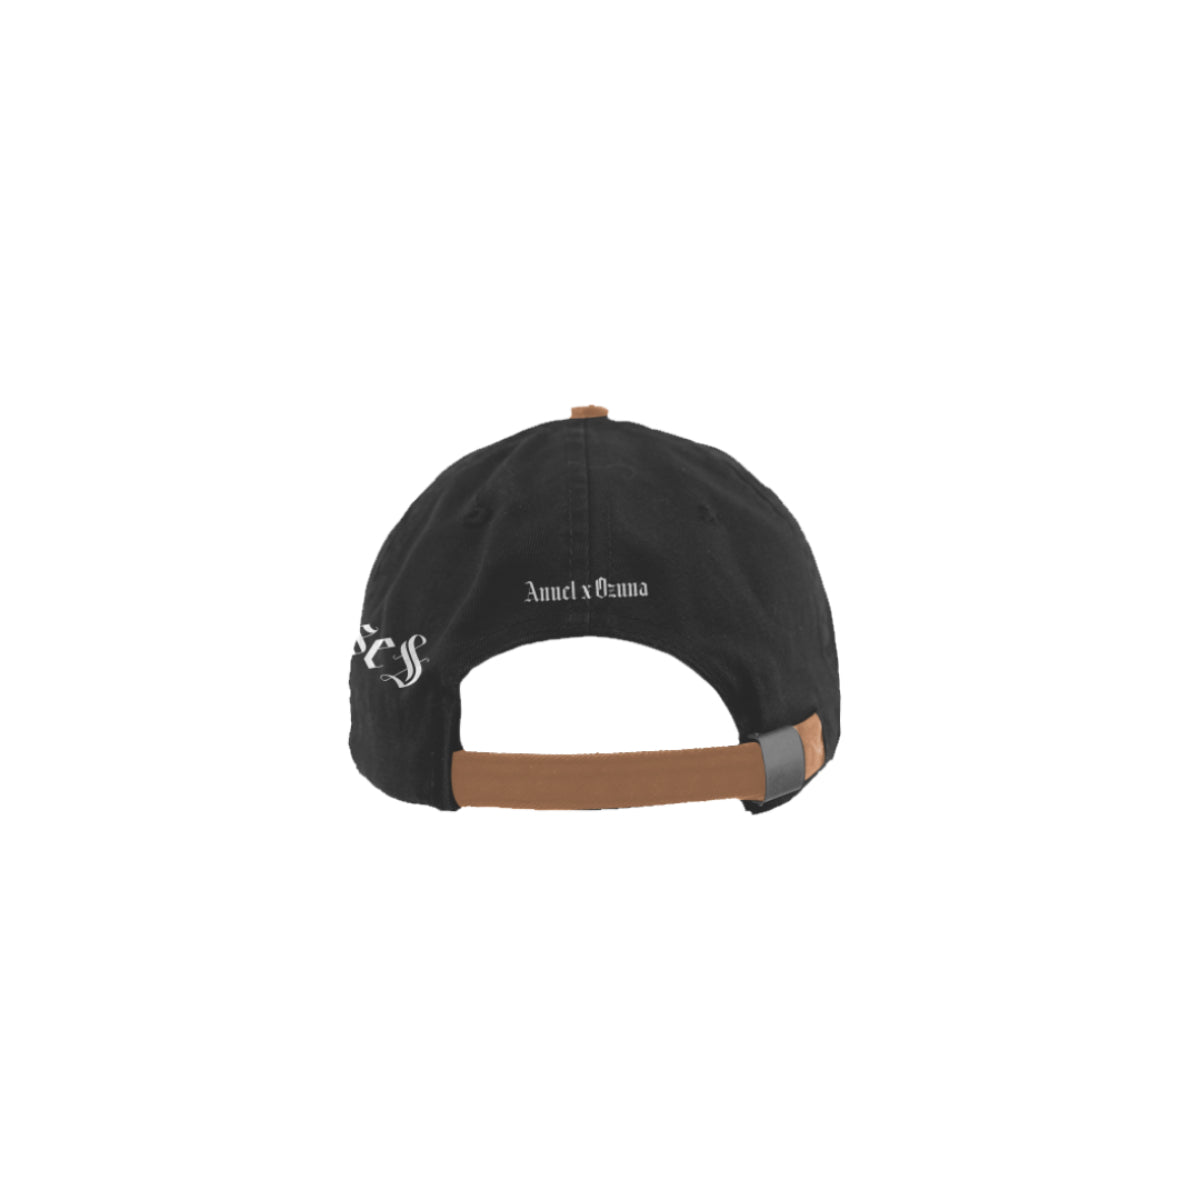 Los Dioses Two-Tone Hat